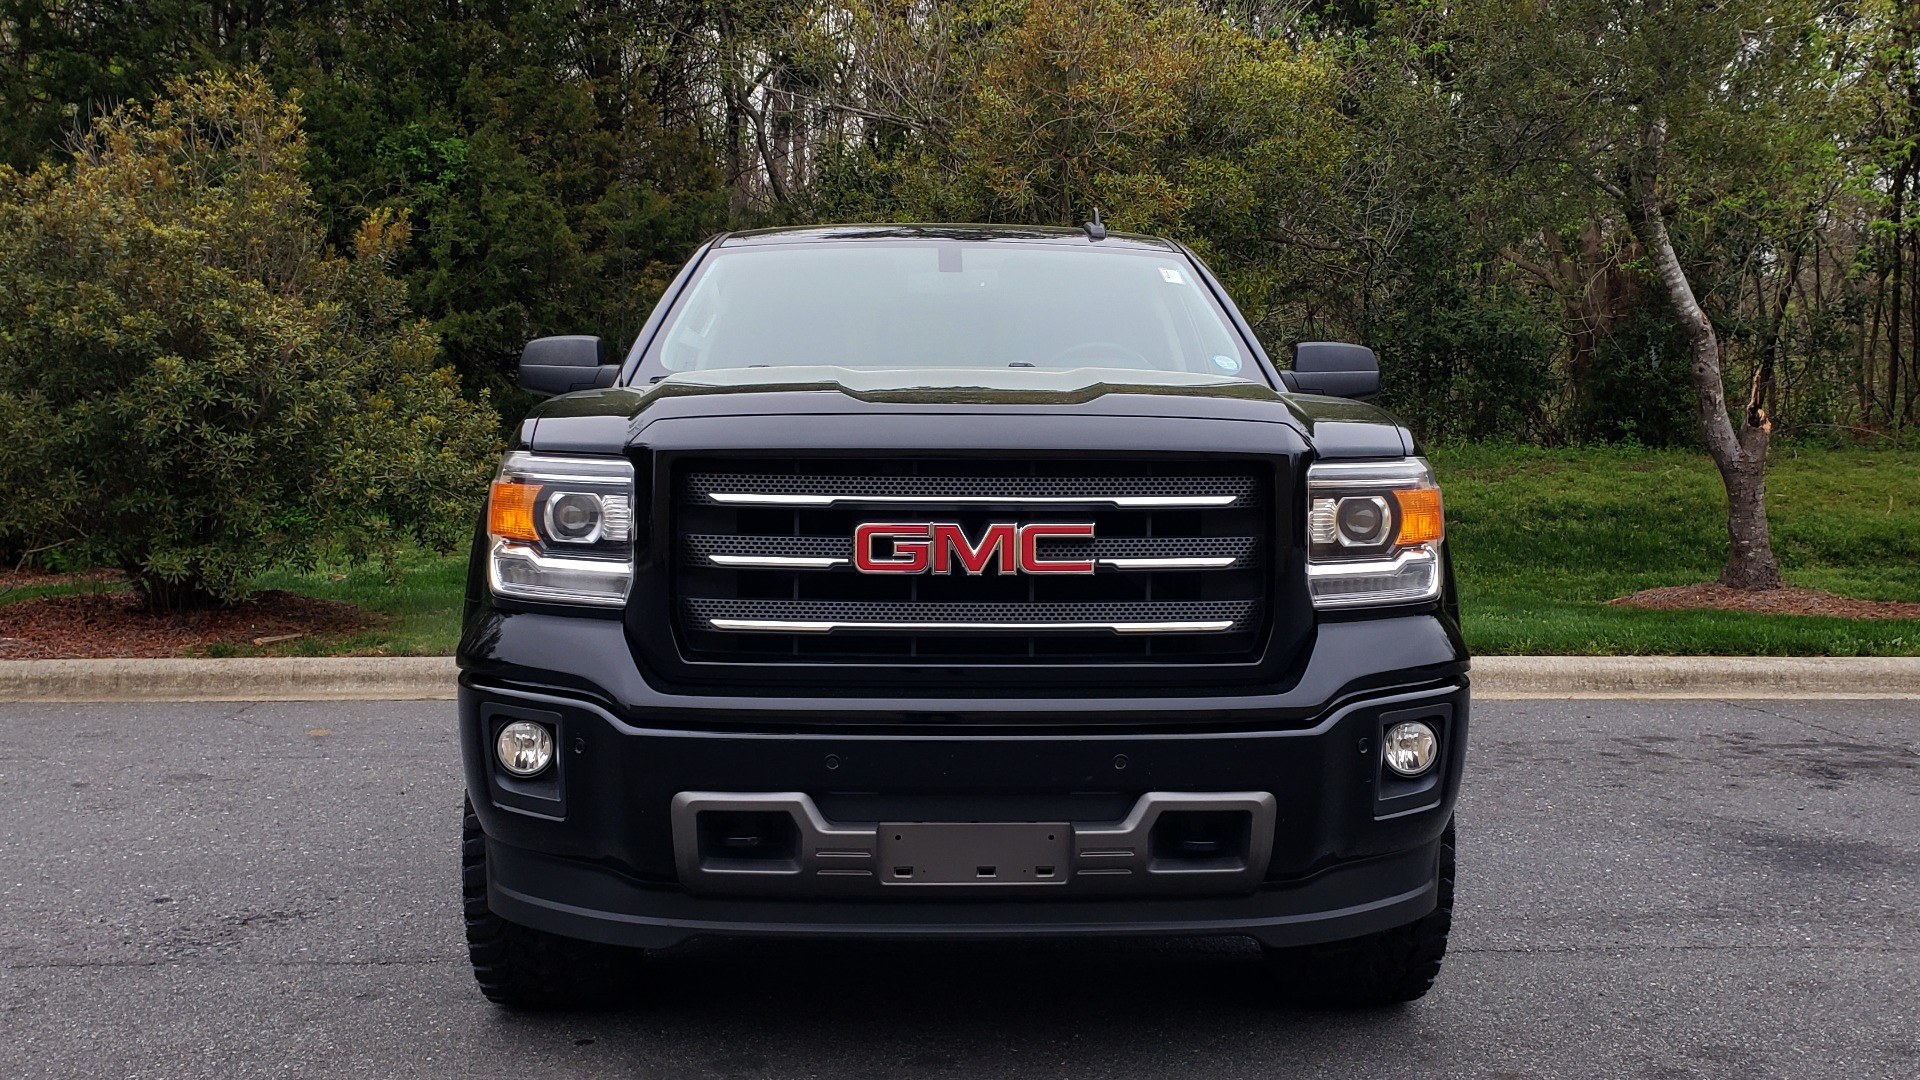 Used 2015 GMC SIERRA 1500 SLT 4WD CREW CAB / 6.2L V8 / NAV / BOSE / REARVIEW for sale Sold at Formula Imports in Charlotte NC 28227 18